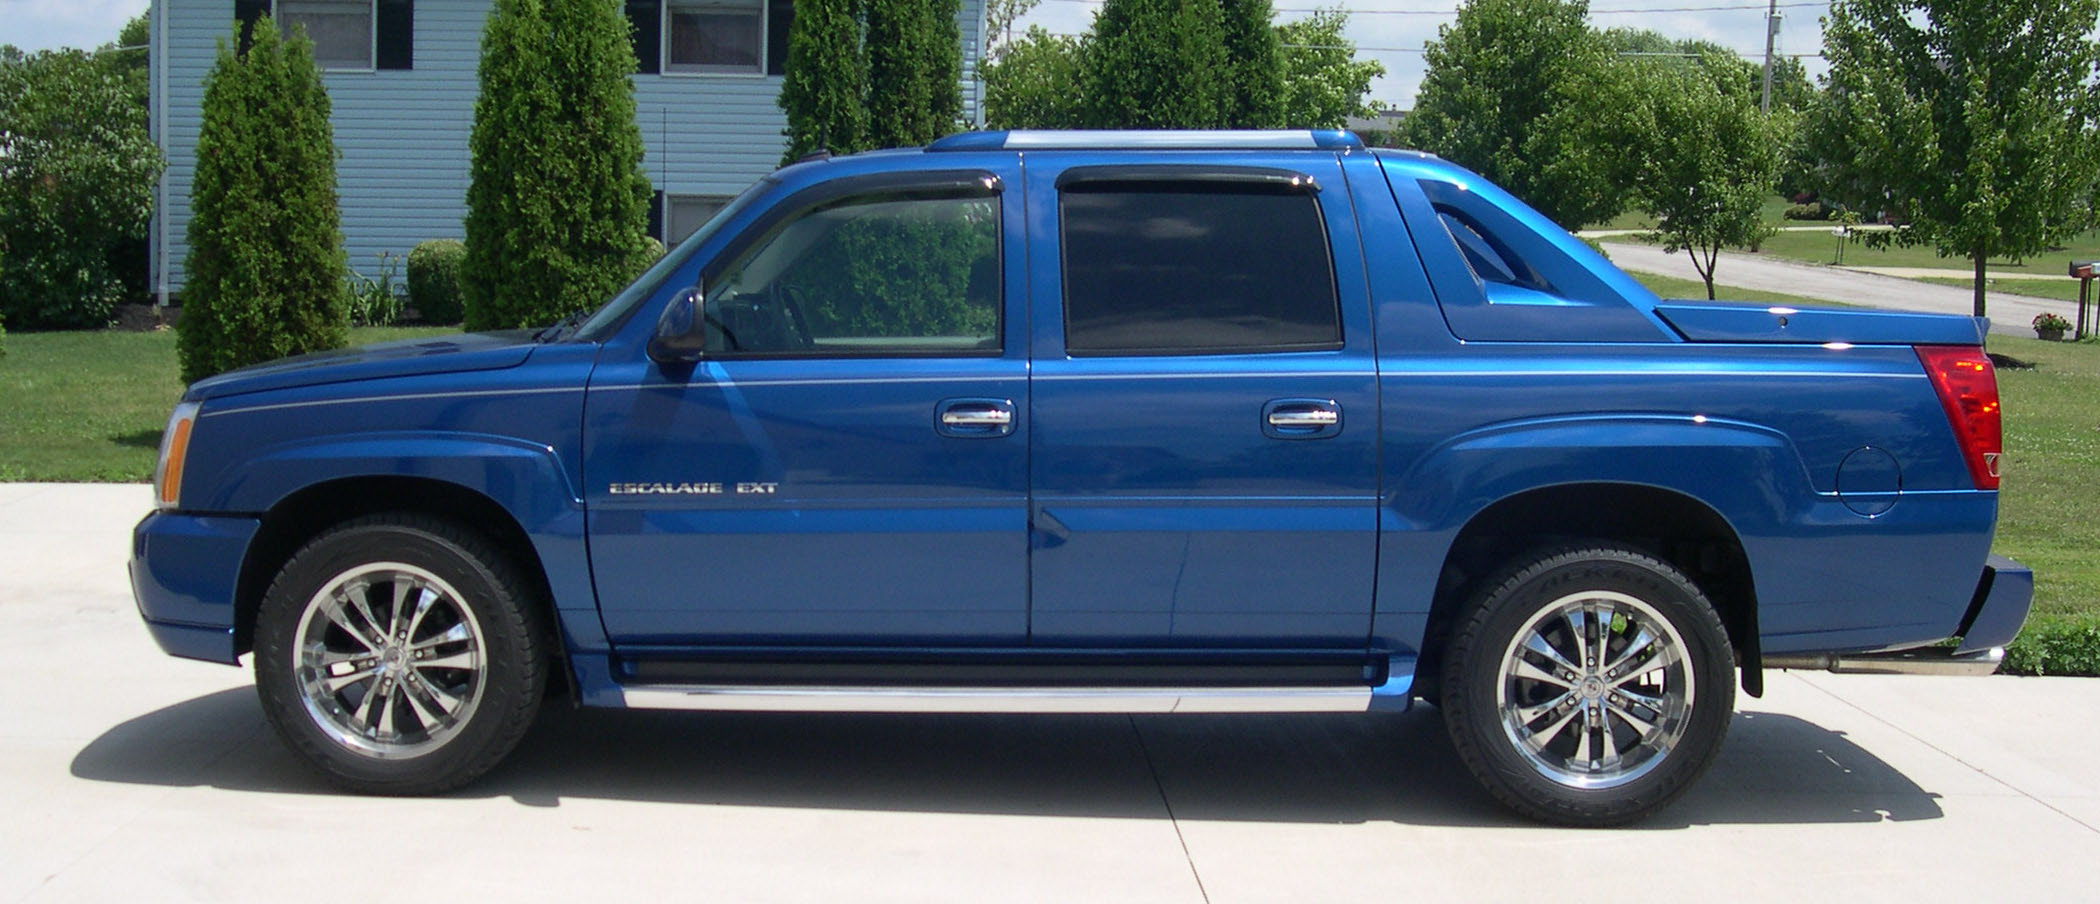 File:2003 Cadillac Escalade EXT side.JPG - Wikimedia Commons